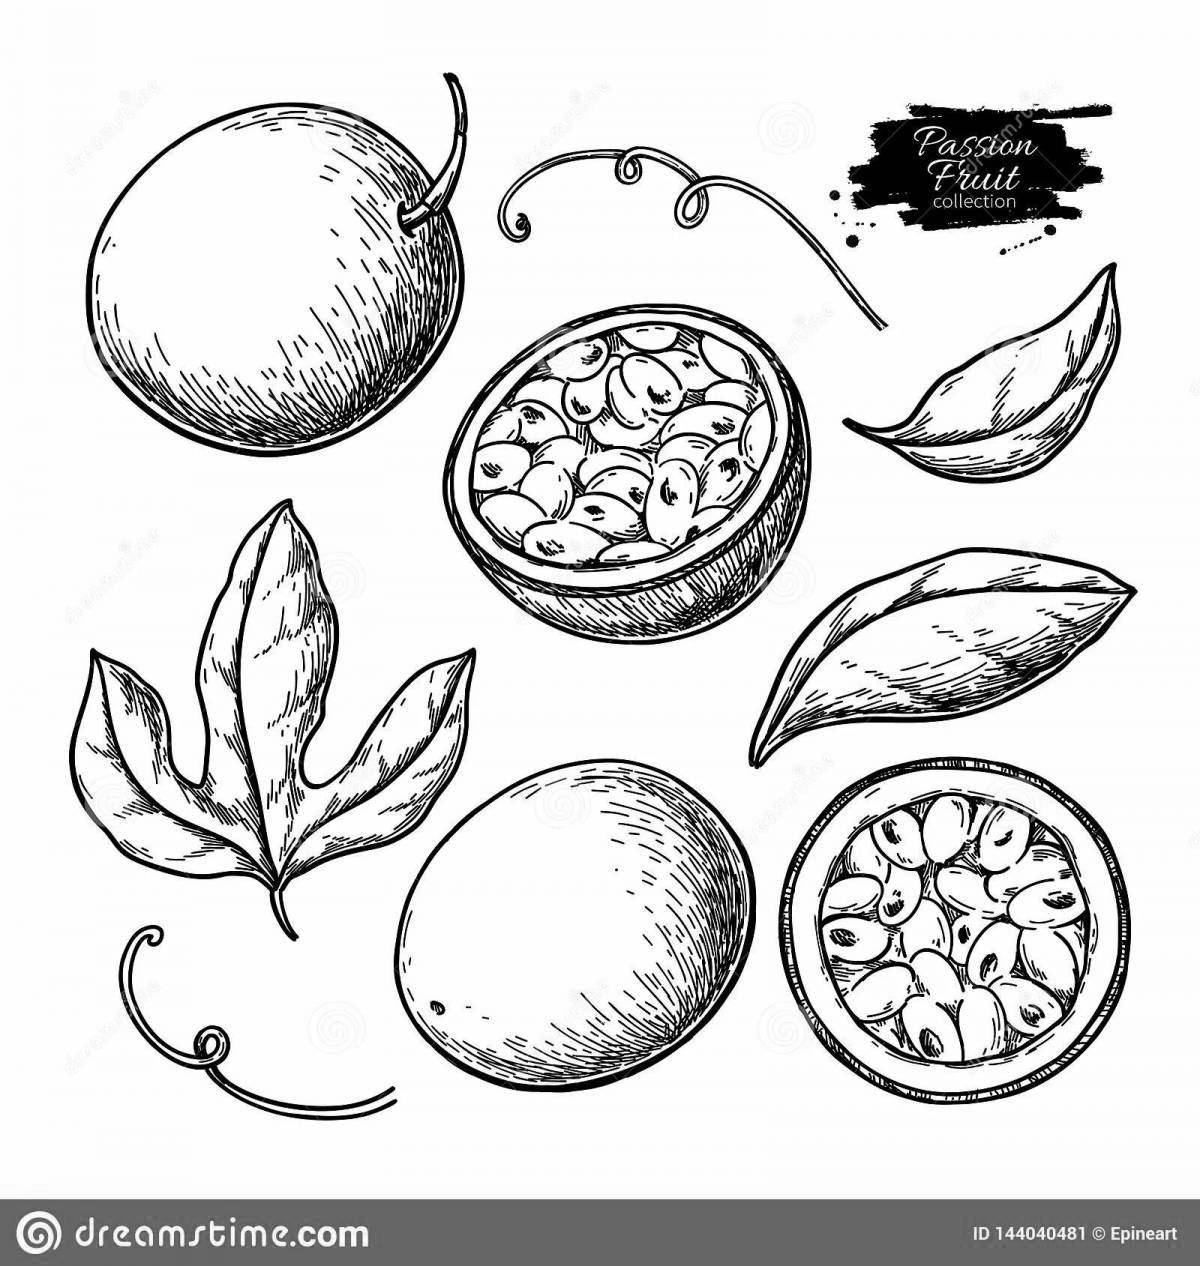 Playful passion fruit coloring page